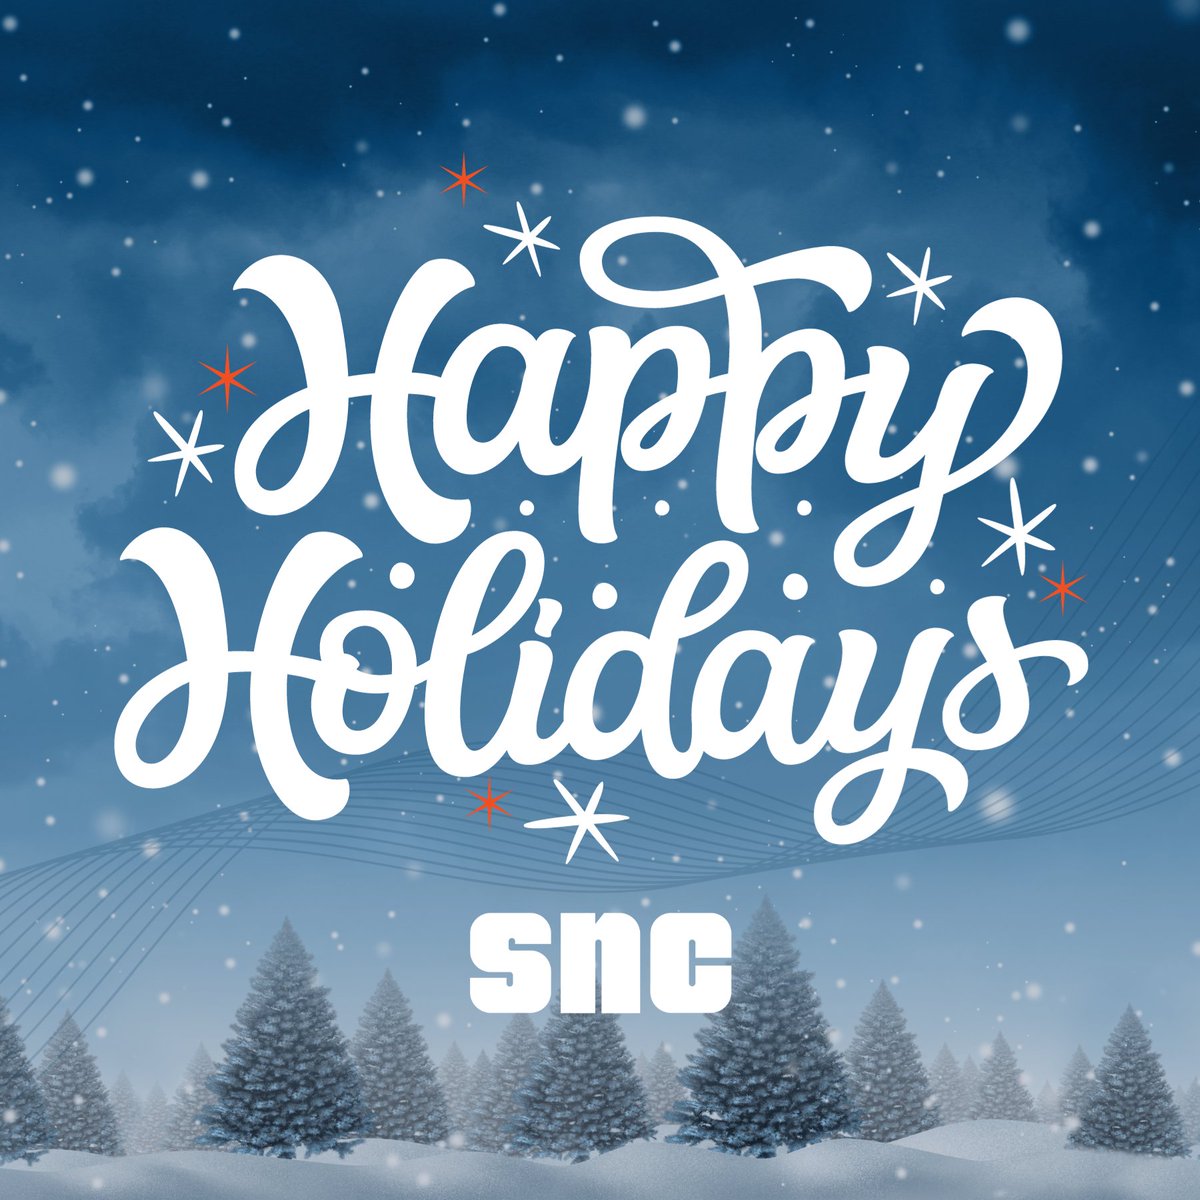 Celebrating this joyous season with you and sending warm wishes your way. Happy Holidays from everyone at SNC! ❄️